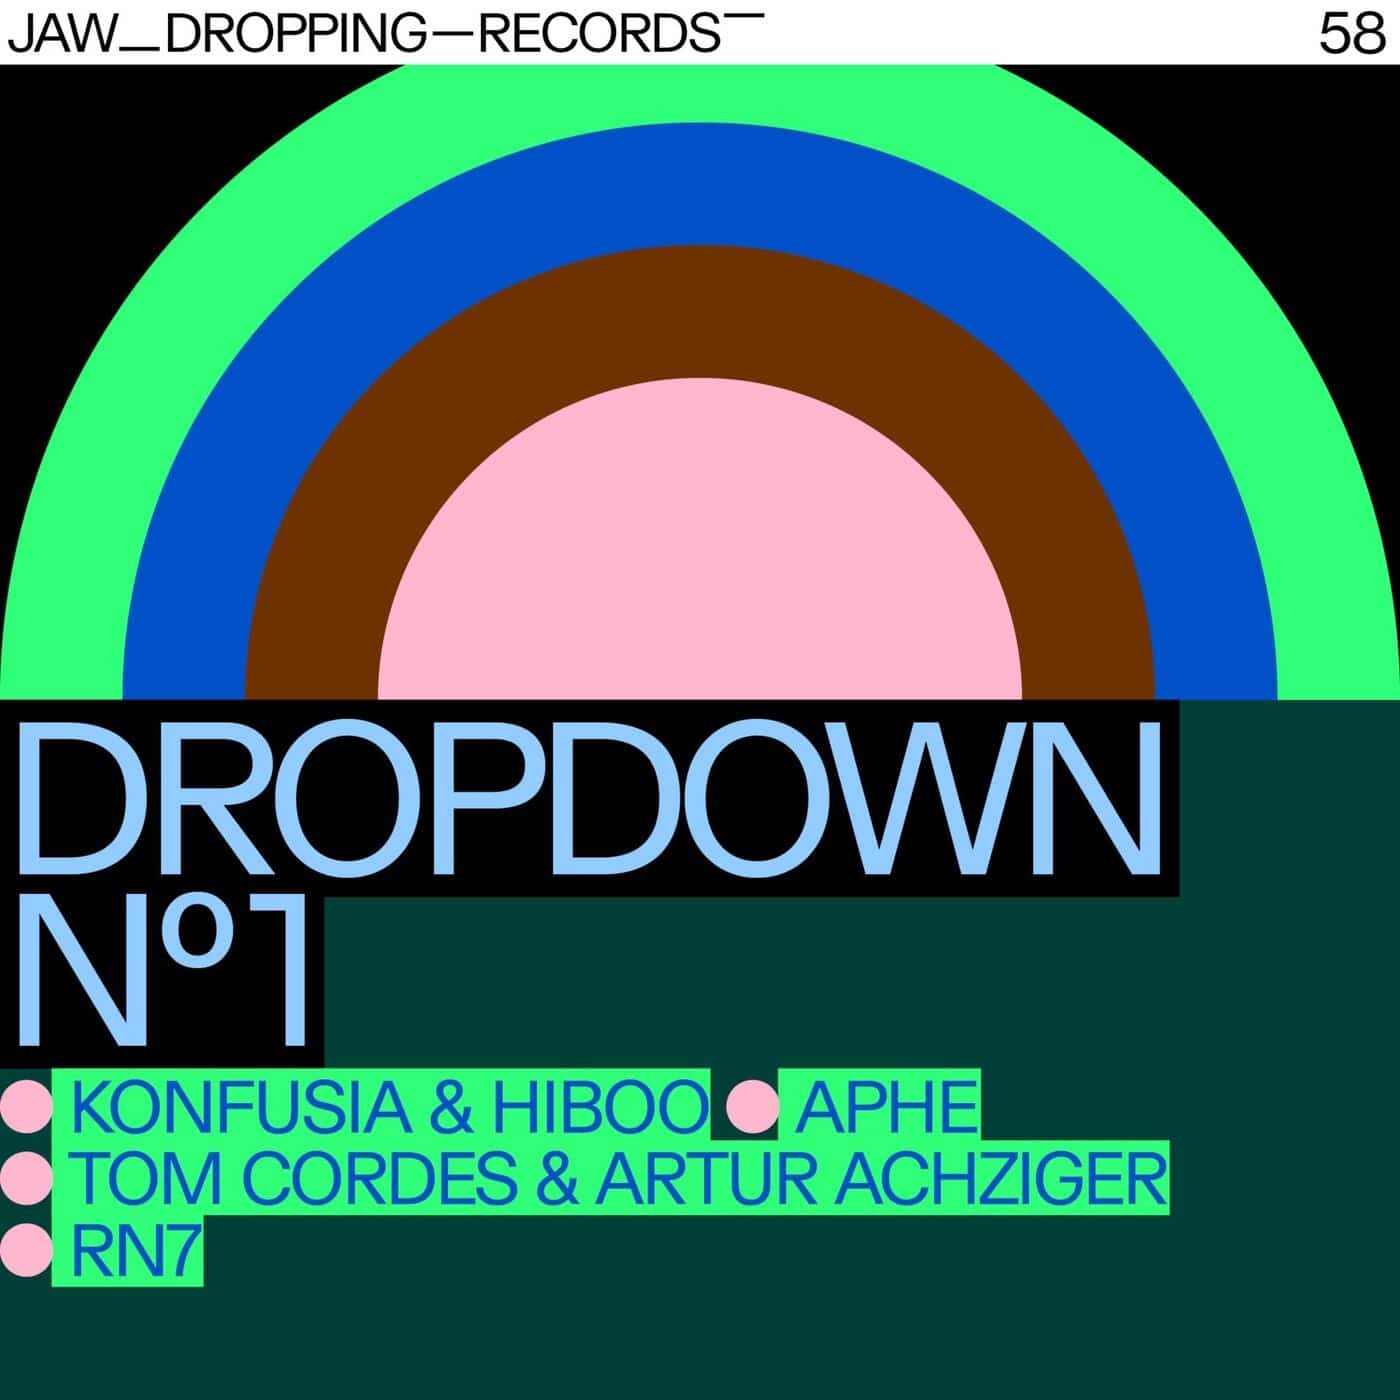 image cover: VA - Dropdown 1 on Jaw Dropping Records